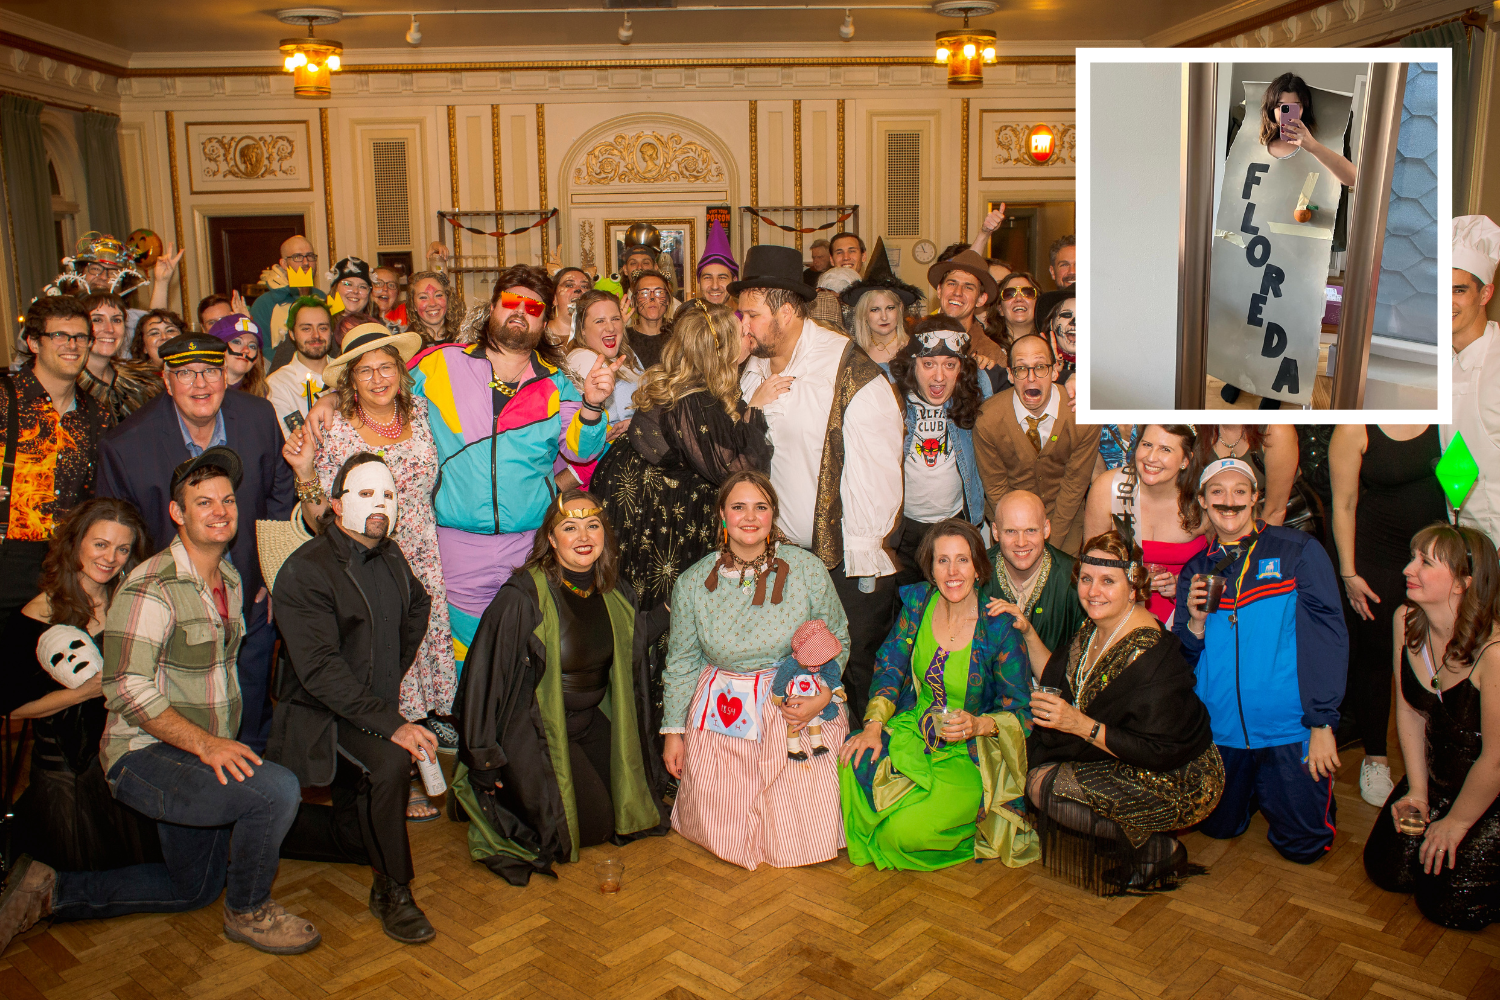 Company Arrive in Full Halloween Costumes to Couple’s Shock Wedding ceremony